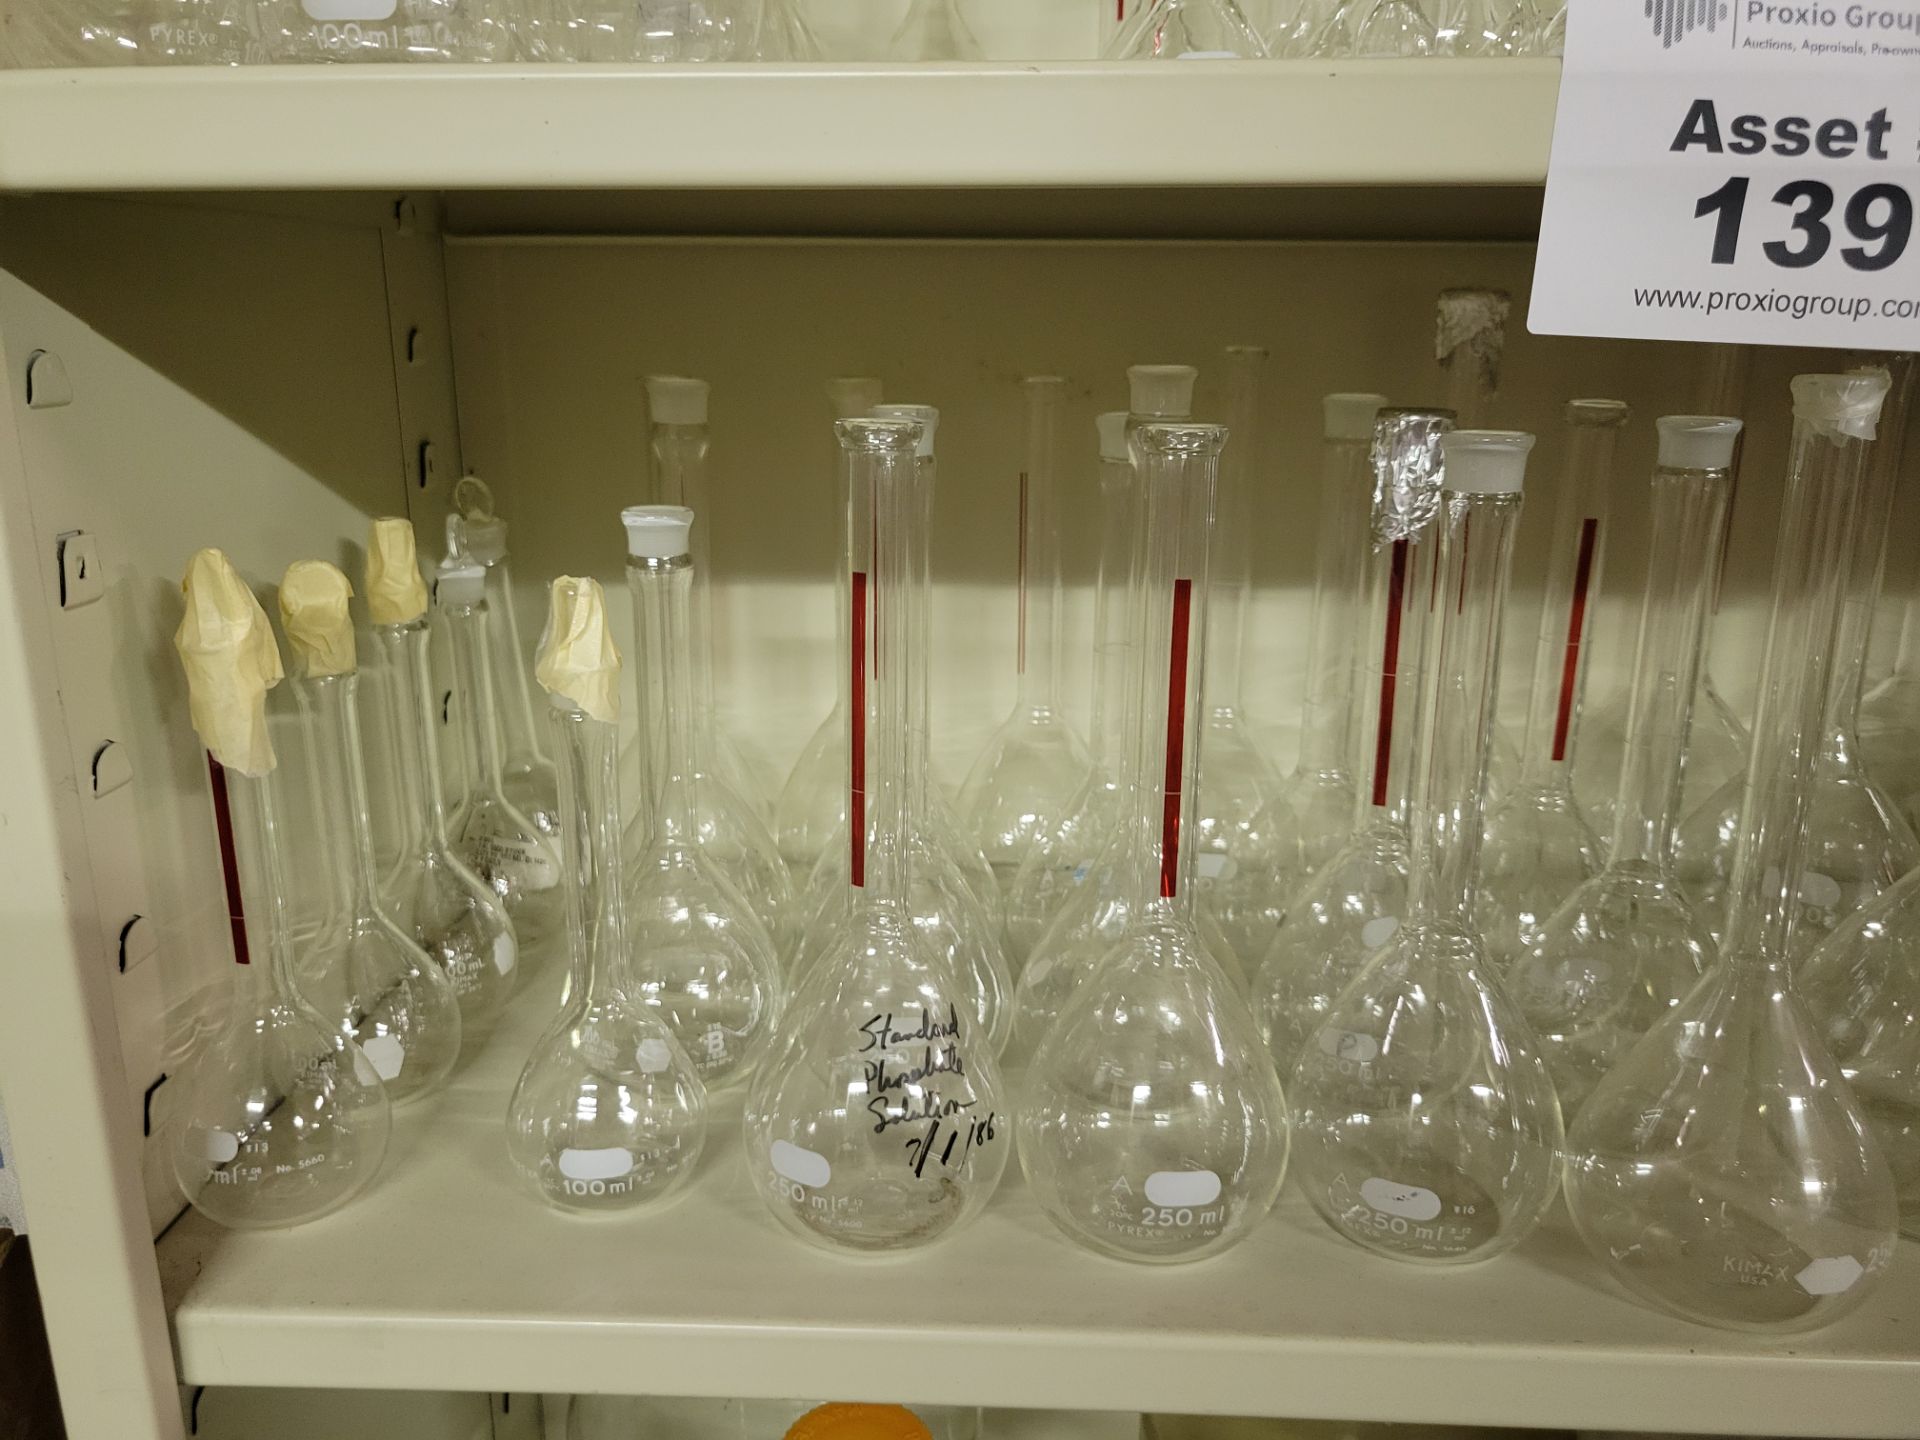 (2) Shelves of Various Sized and Manufacturer Glass Erlenmeyer Flasks Sizes Range From 25 to500mL - Image 5 of 5